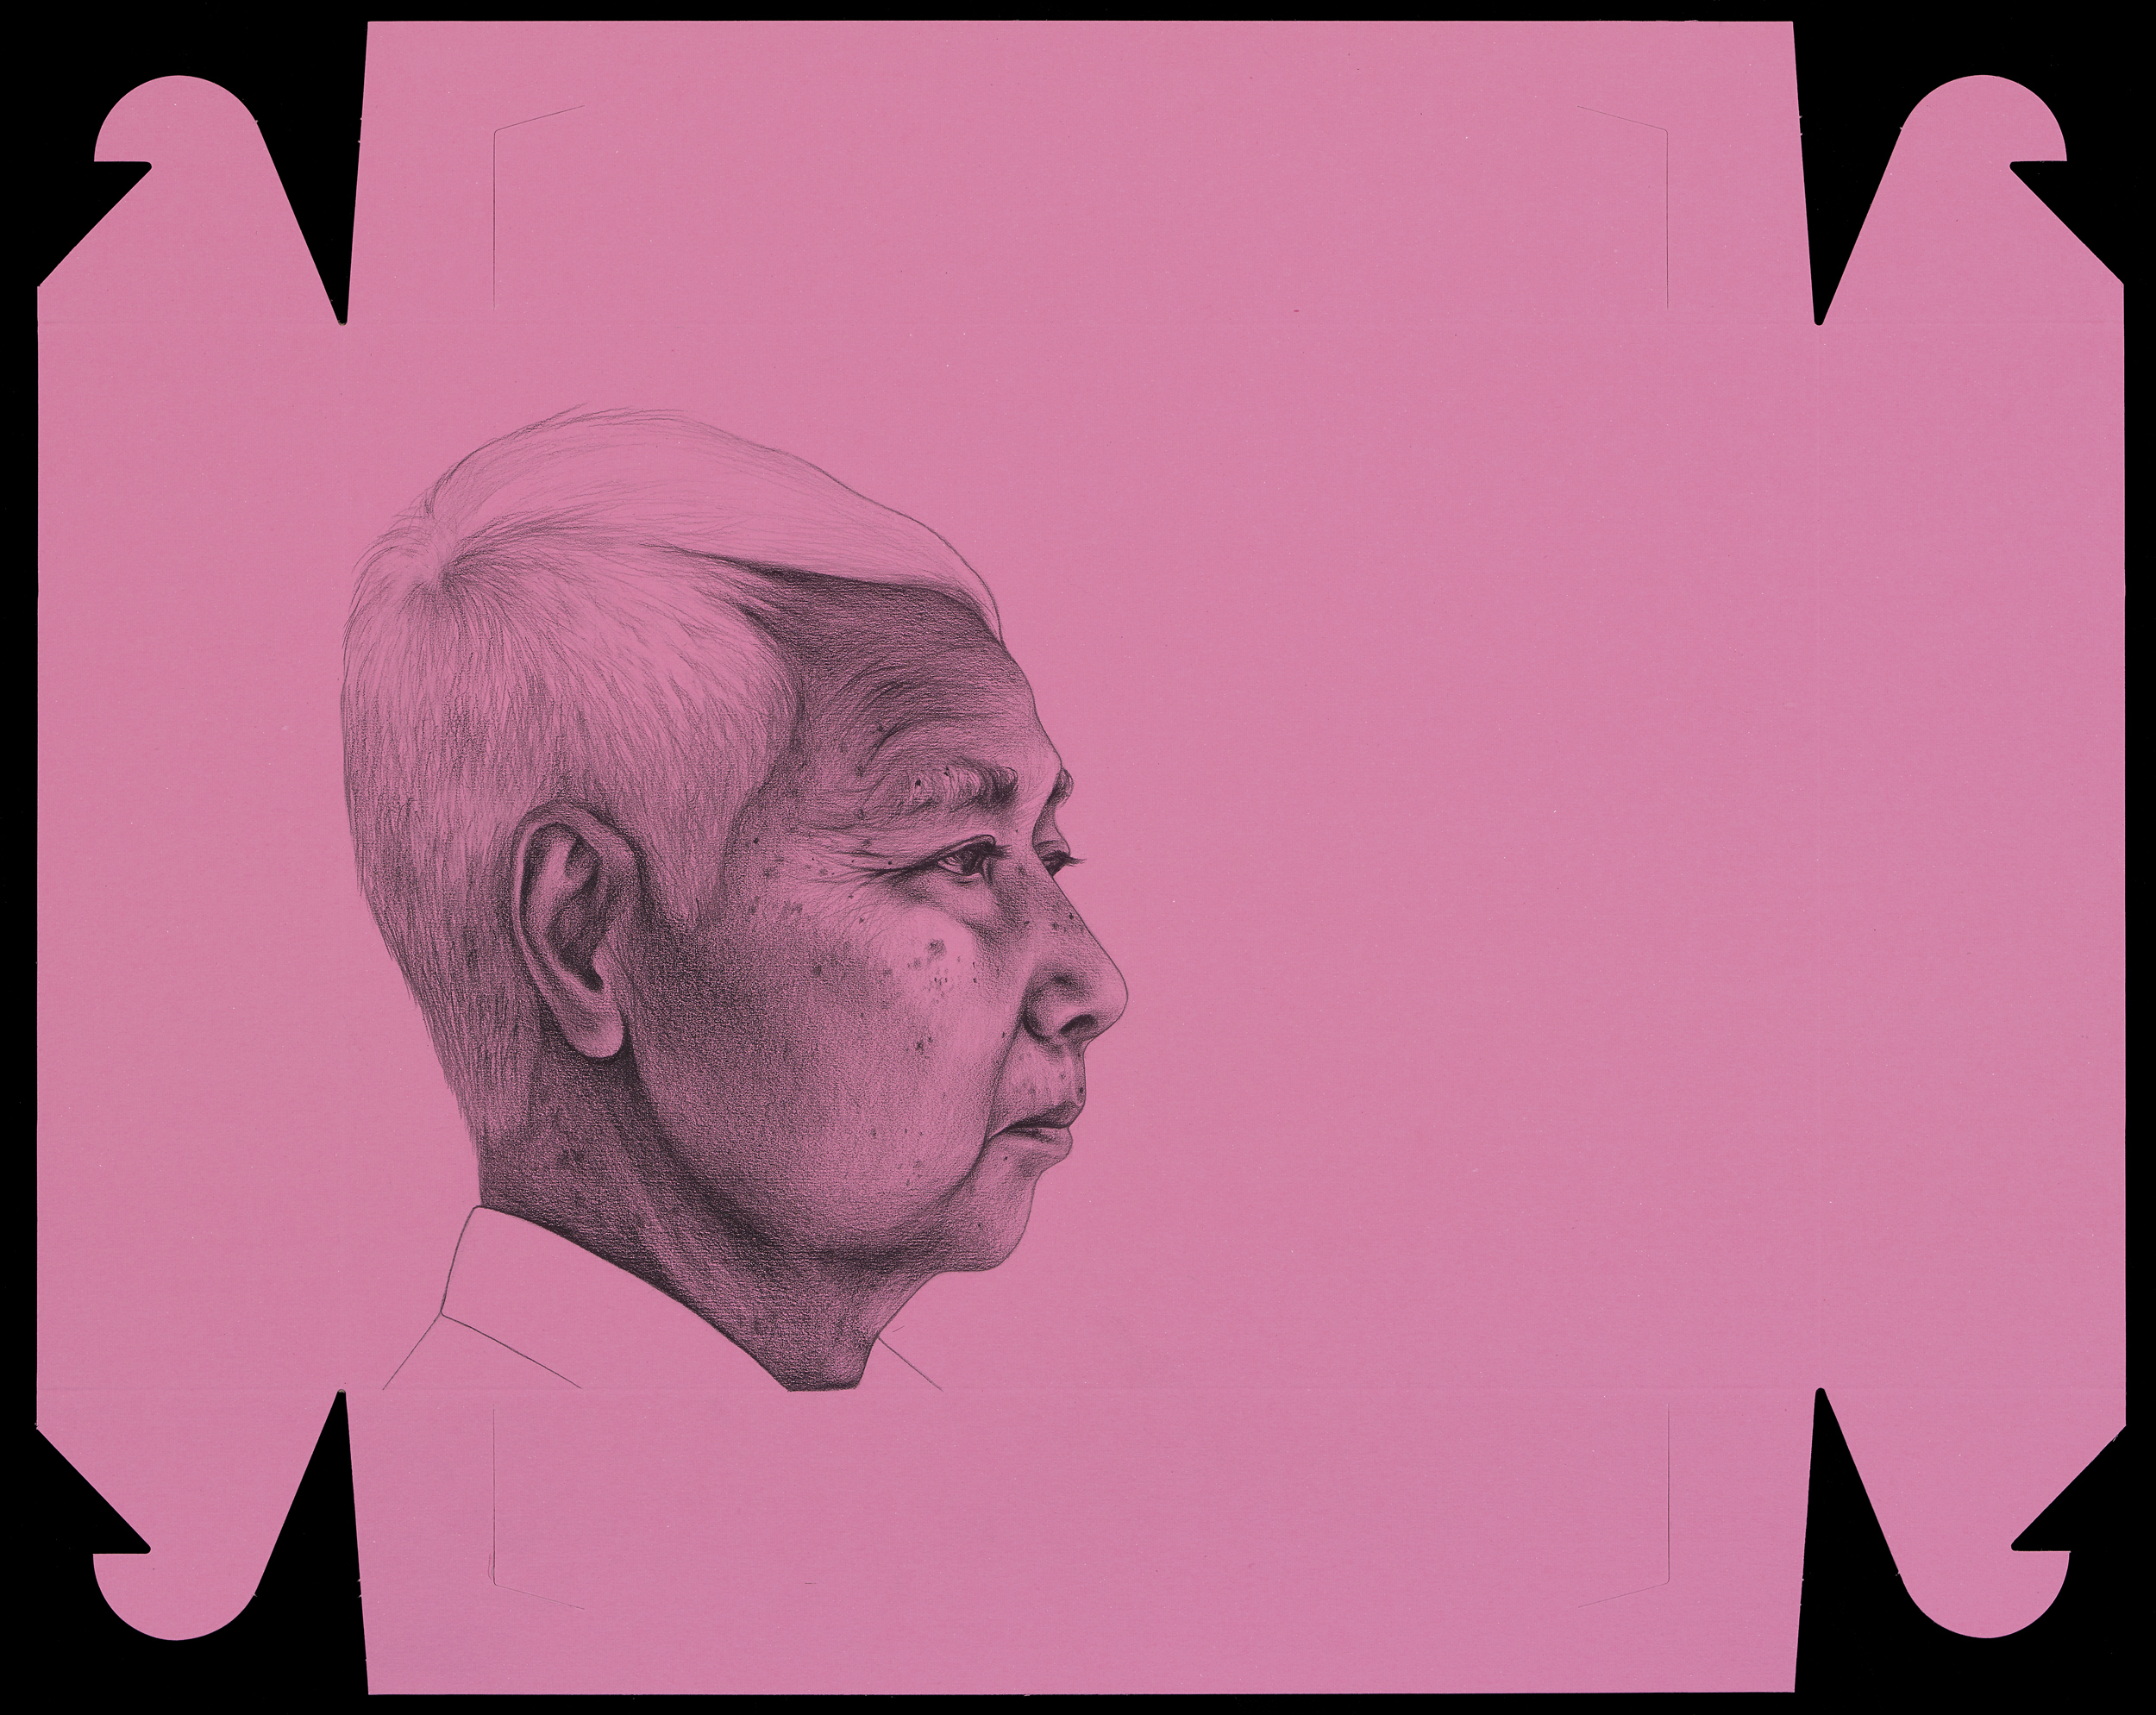 Detailed graphite drawing of an elderly man's face on a pink donut box. 